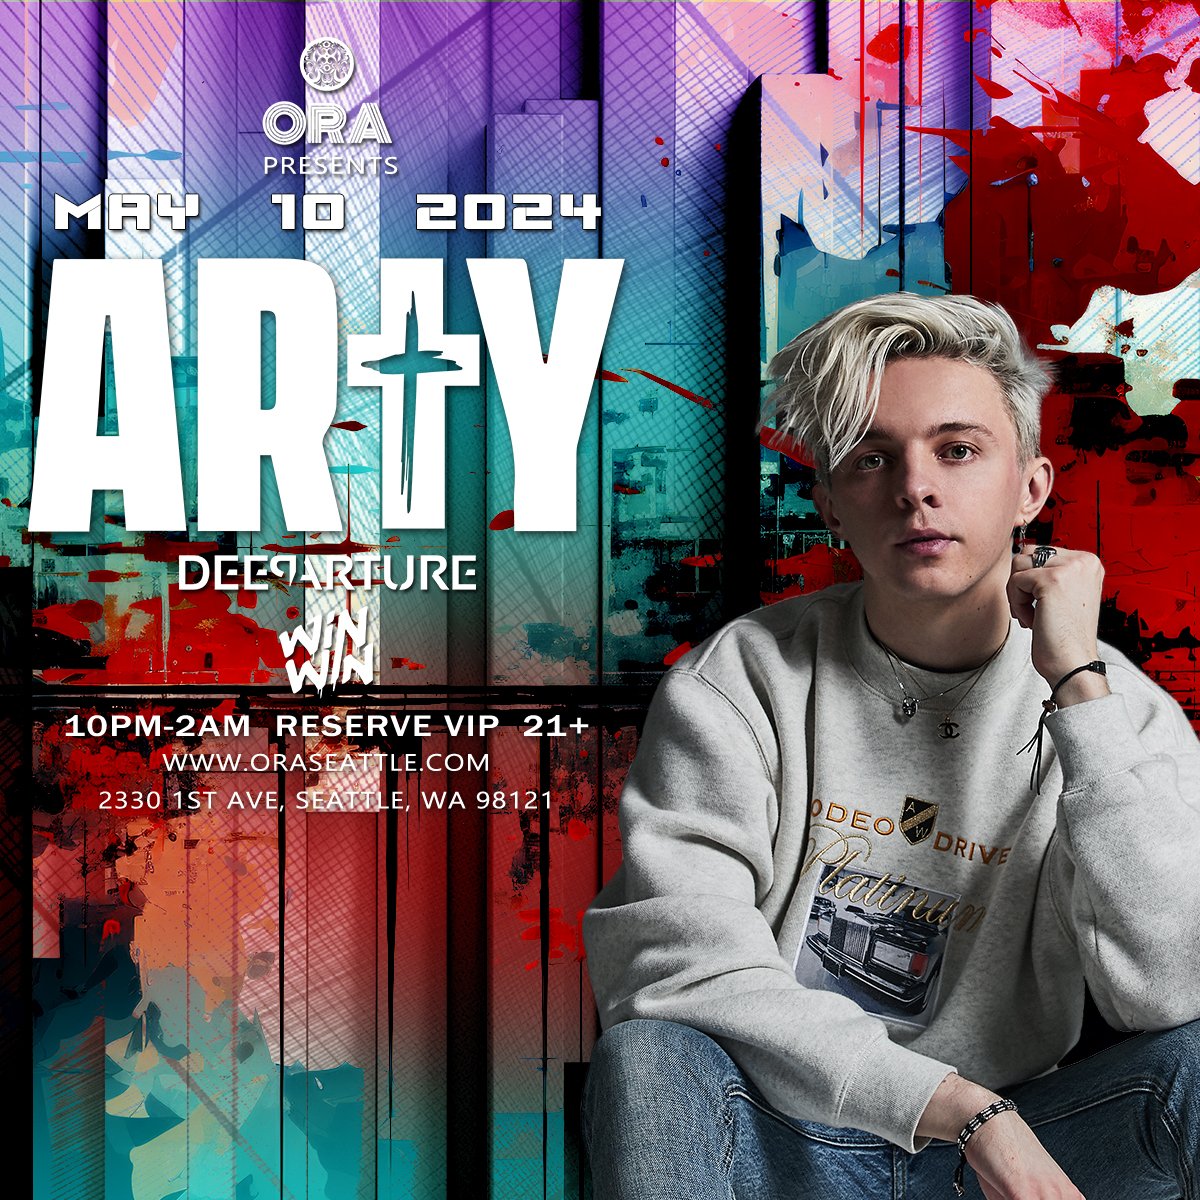 Ora Nightclub This Friday May 10- Arty time 
@artymusic at @oraseattle
 Come Join the Party with Arty.
Opening the Decks are @deeparturenl and @itswinwinmusic 
#oraseattle #arty #deeparture #winwin #edm #trace #party #housemusic #NightClubs #eventsinseattle